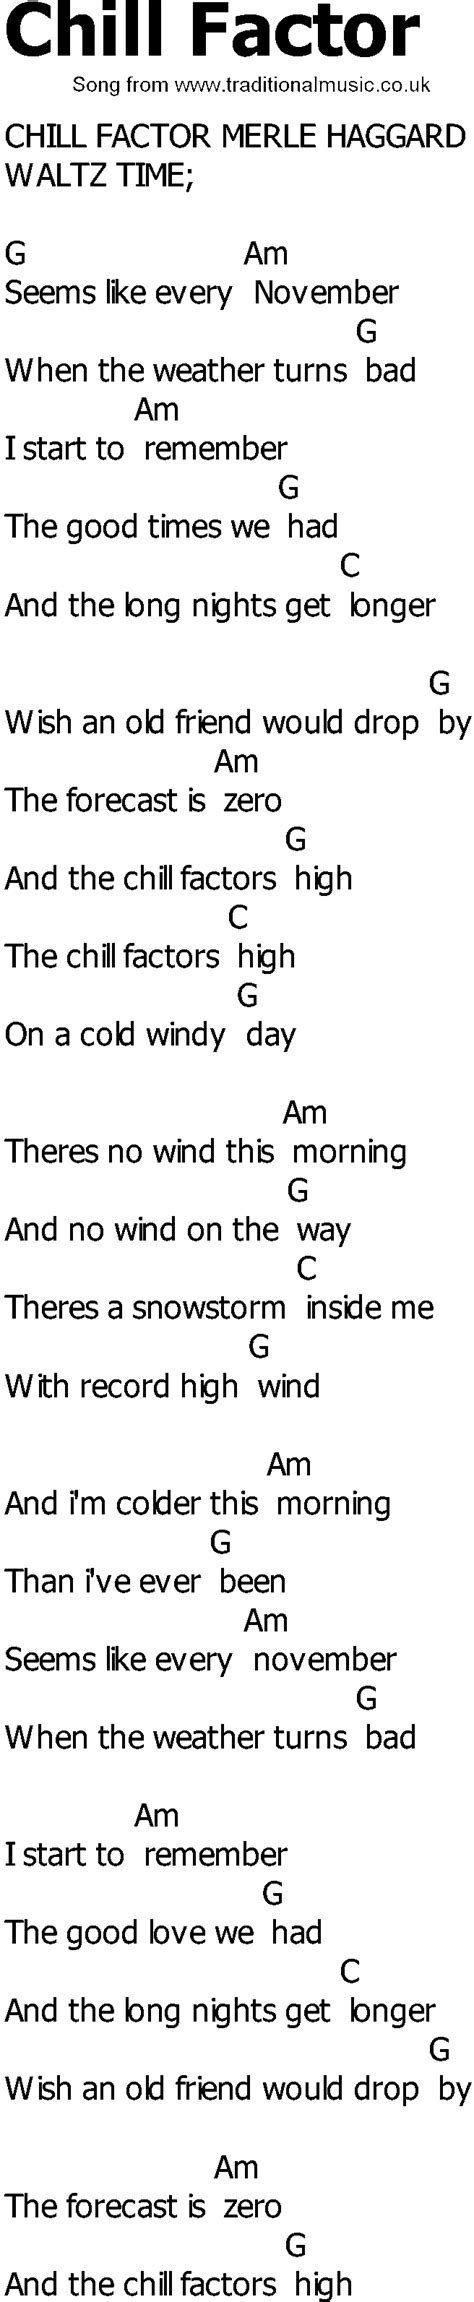 Old Country Song Lyrics With Chords Chill Factor